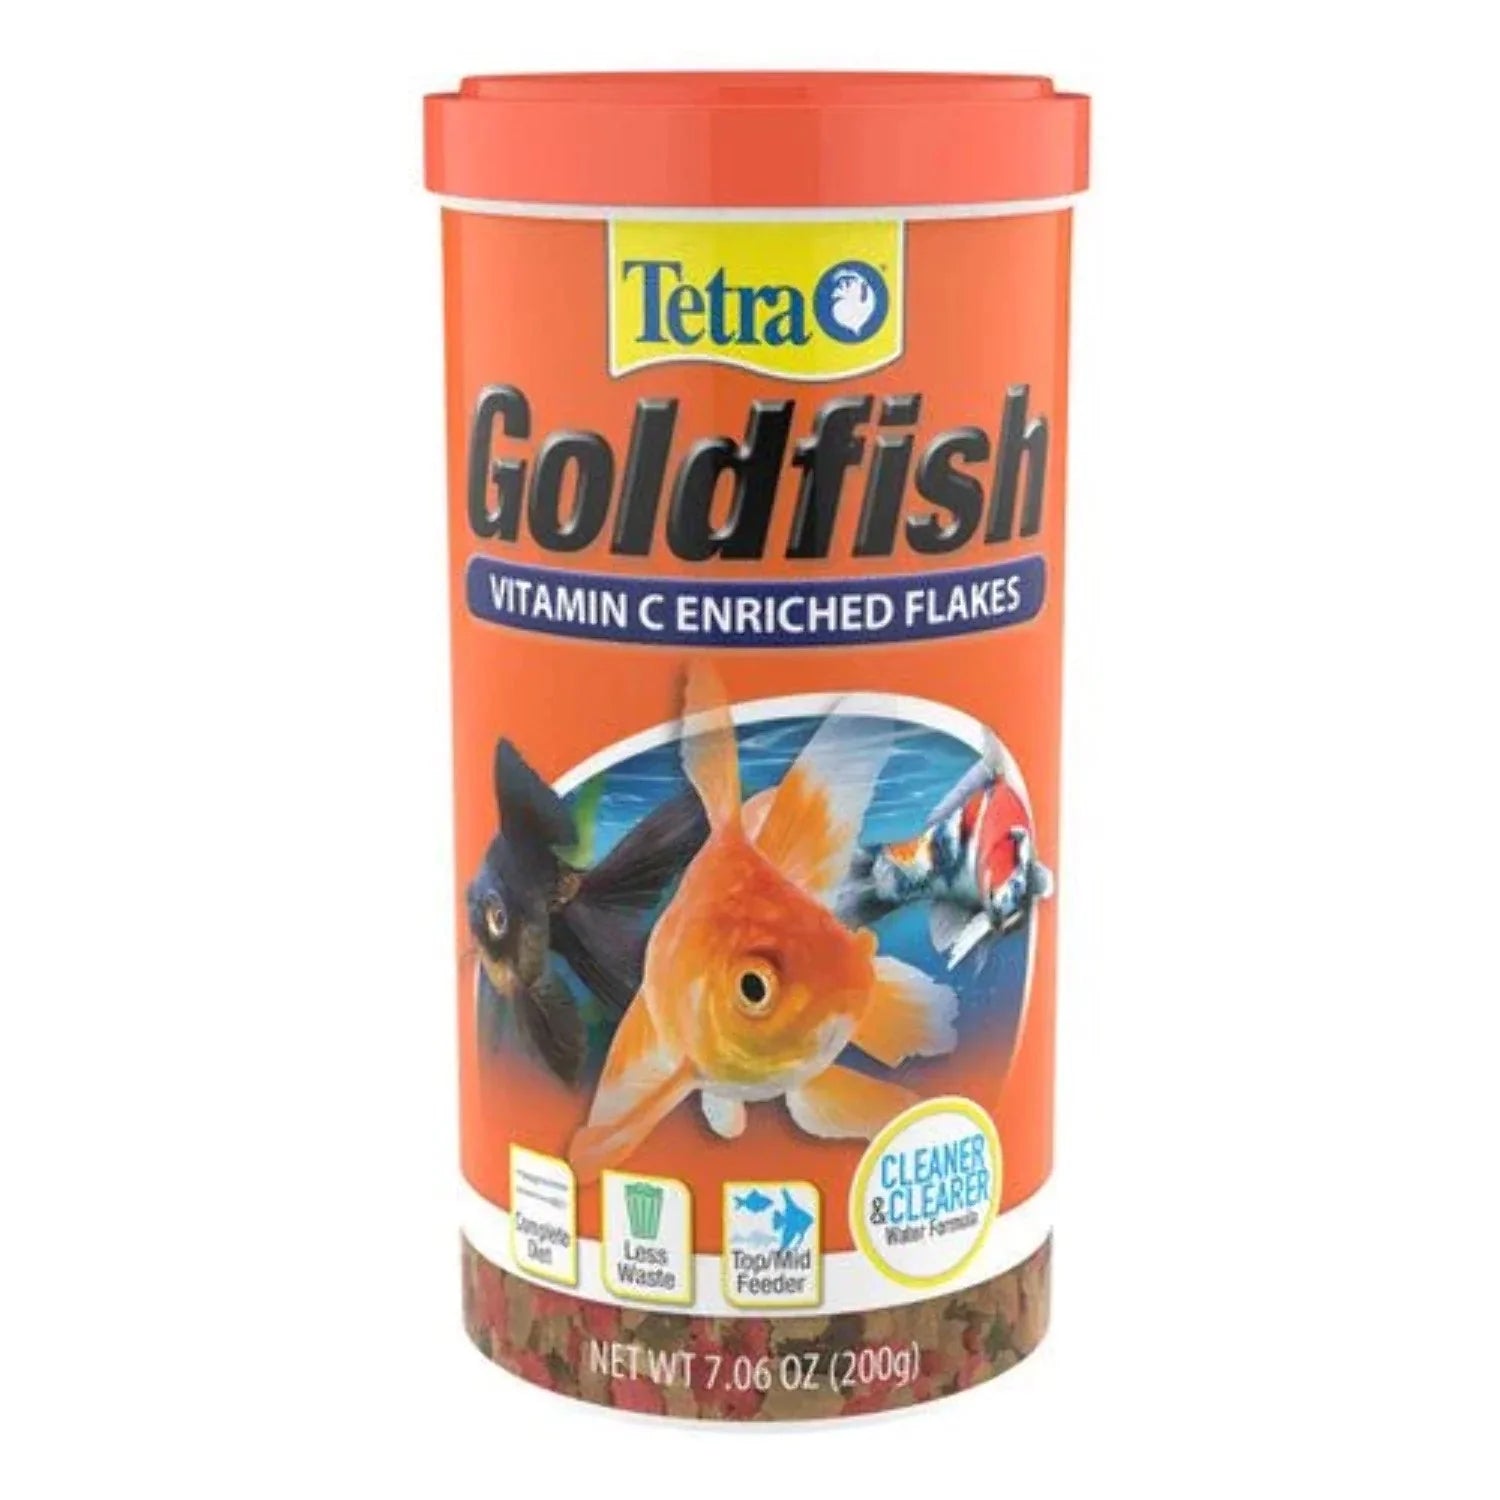 Wholesale prices with free shipping all over United States Tetra TetraFin Goldfish Flakes 7.06 Ounces, Balanced Diet Fish Food - Steven Deals